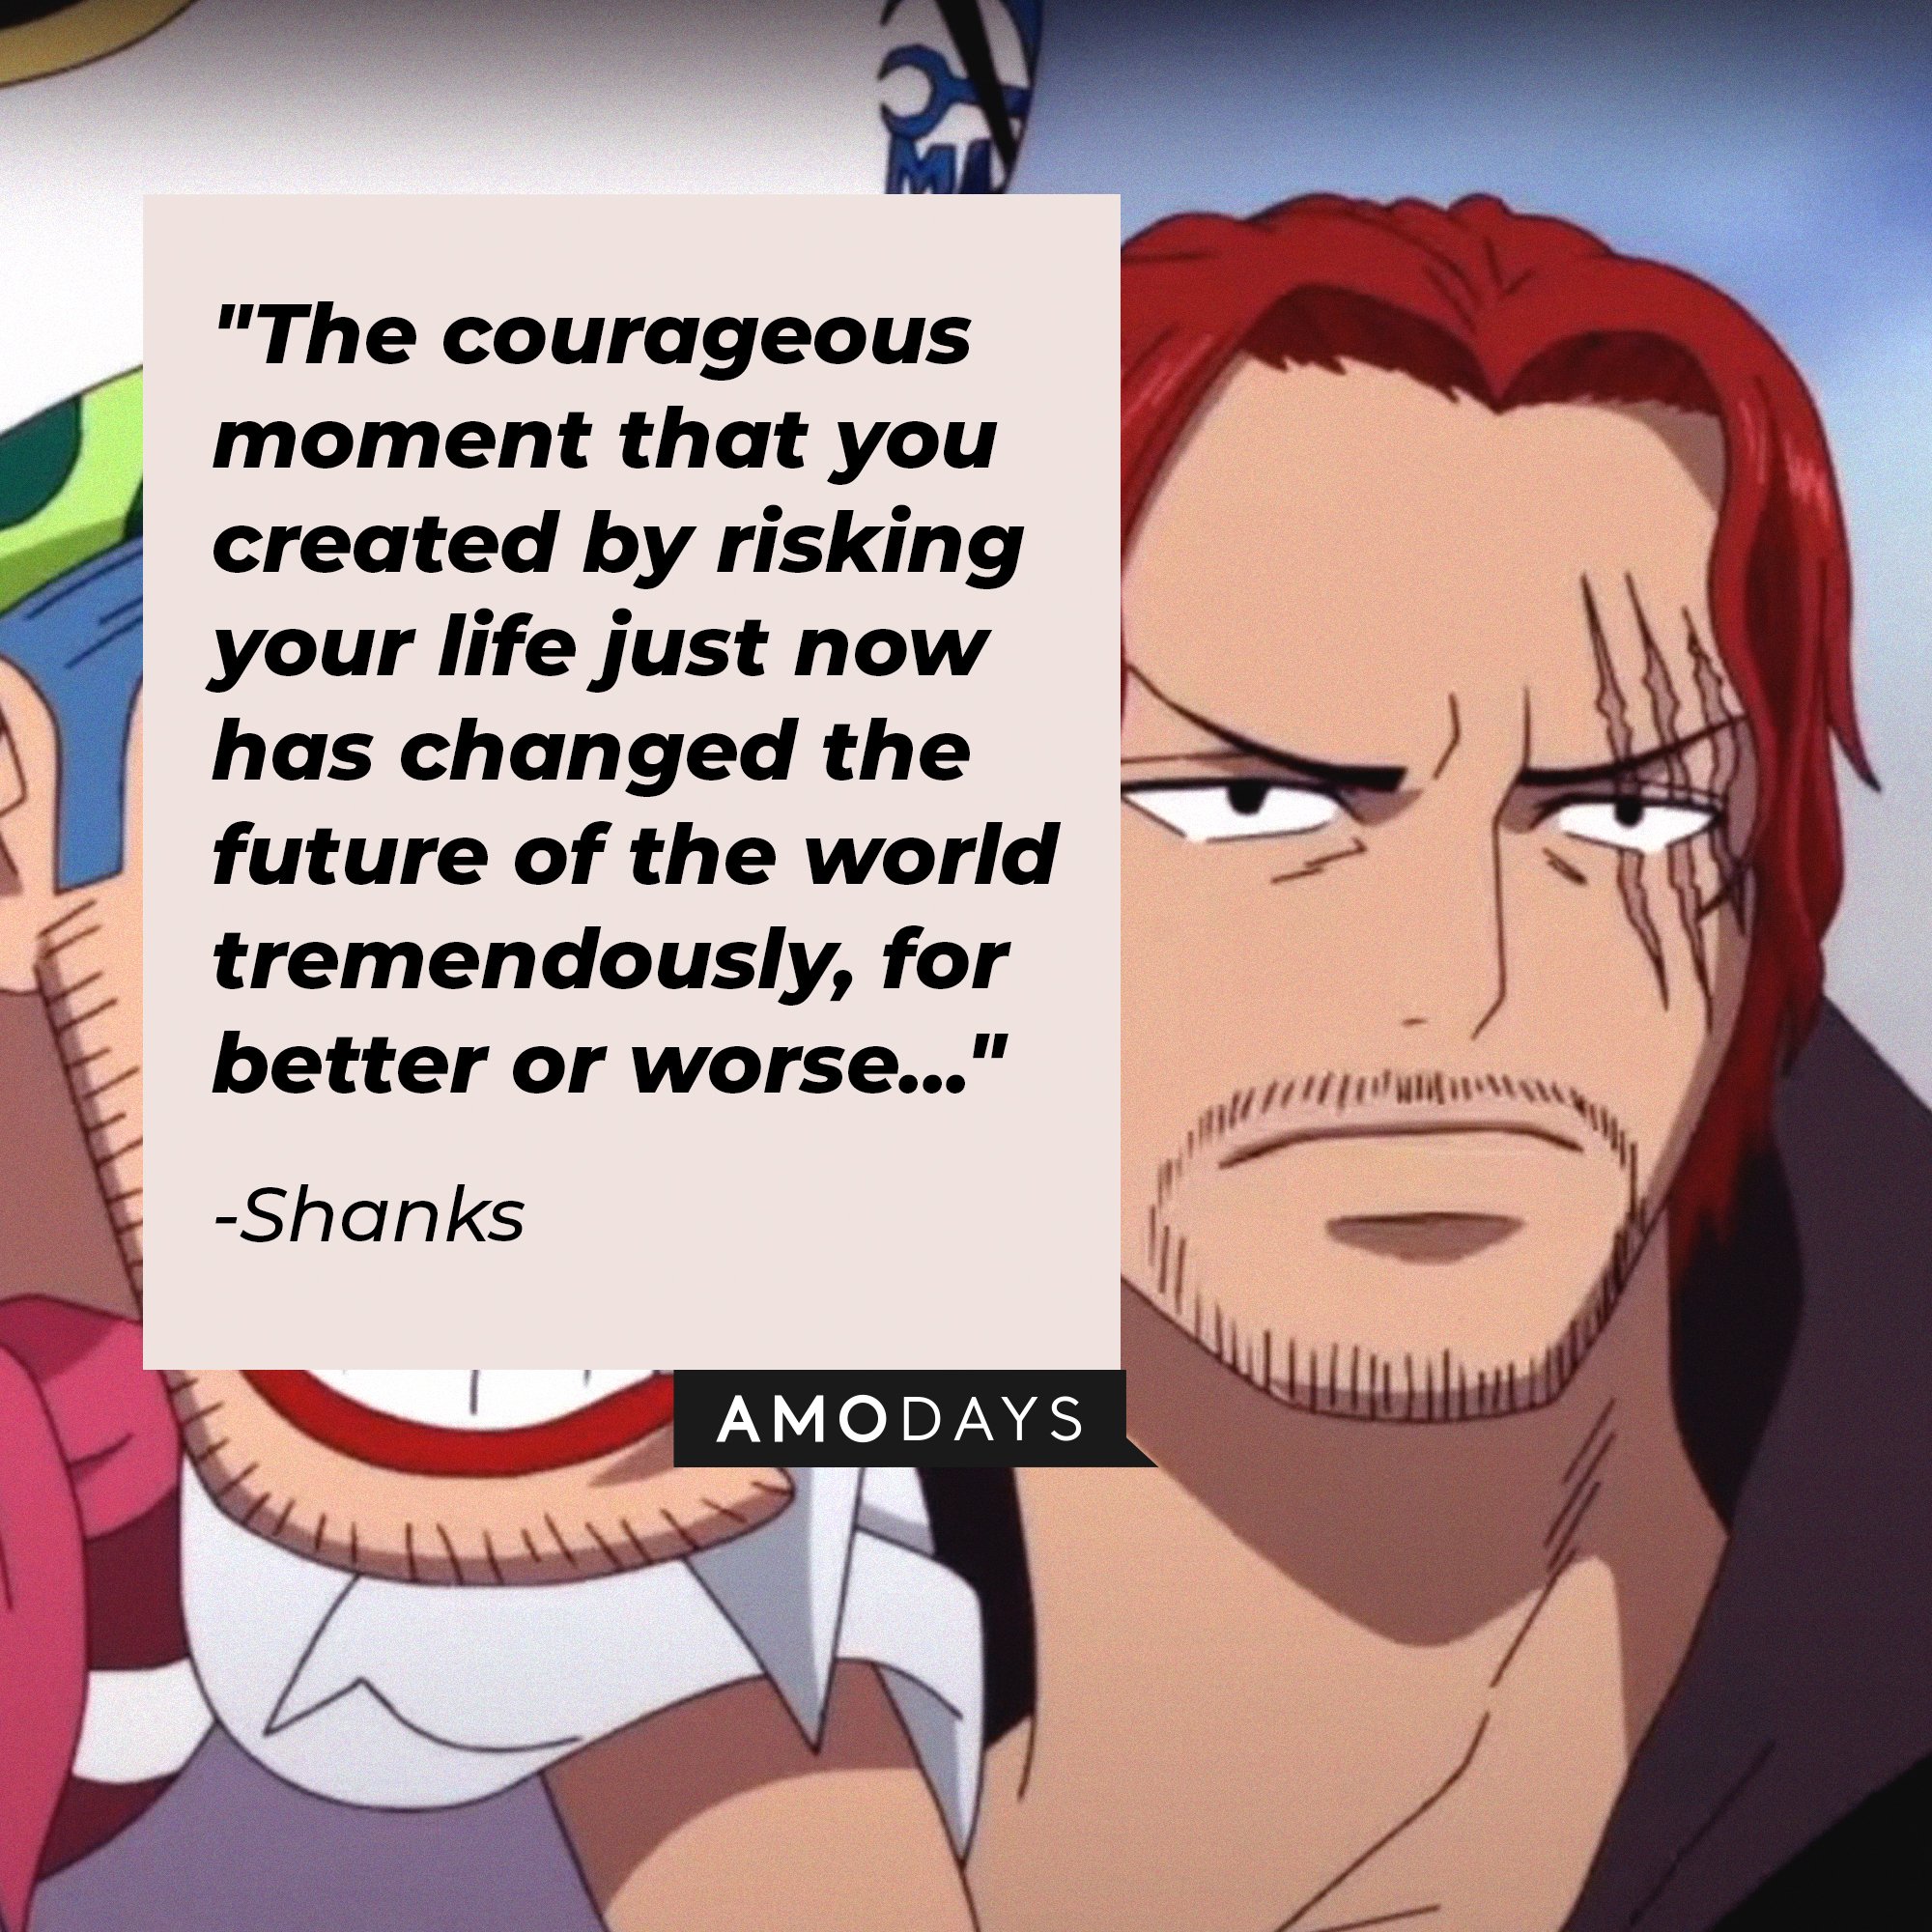 Shanks' quote: “The courageous moment that you created by risking your life just now has changed the future of the world tremendously, for better or worse..." | Image: AmoDays